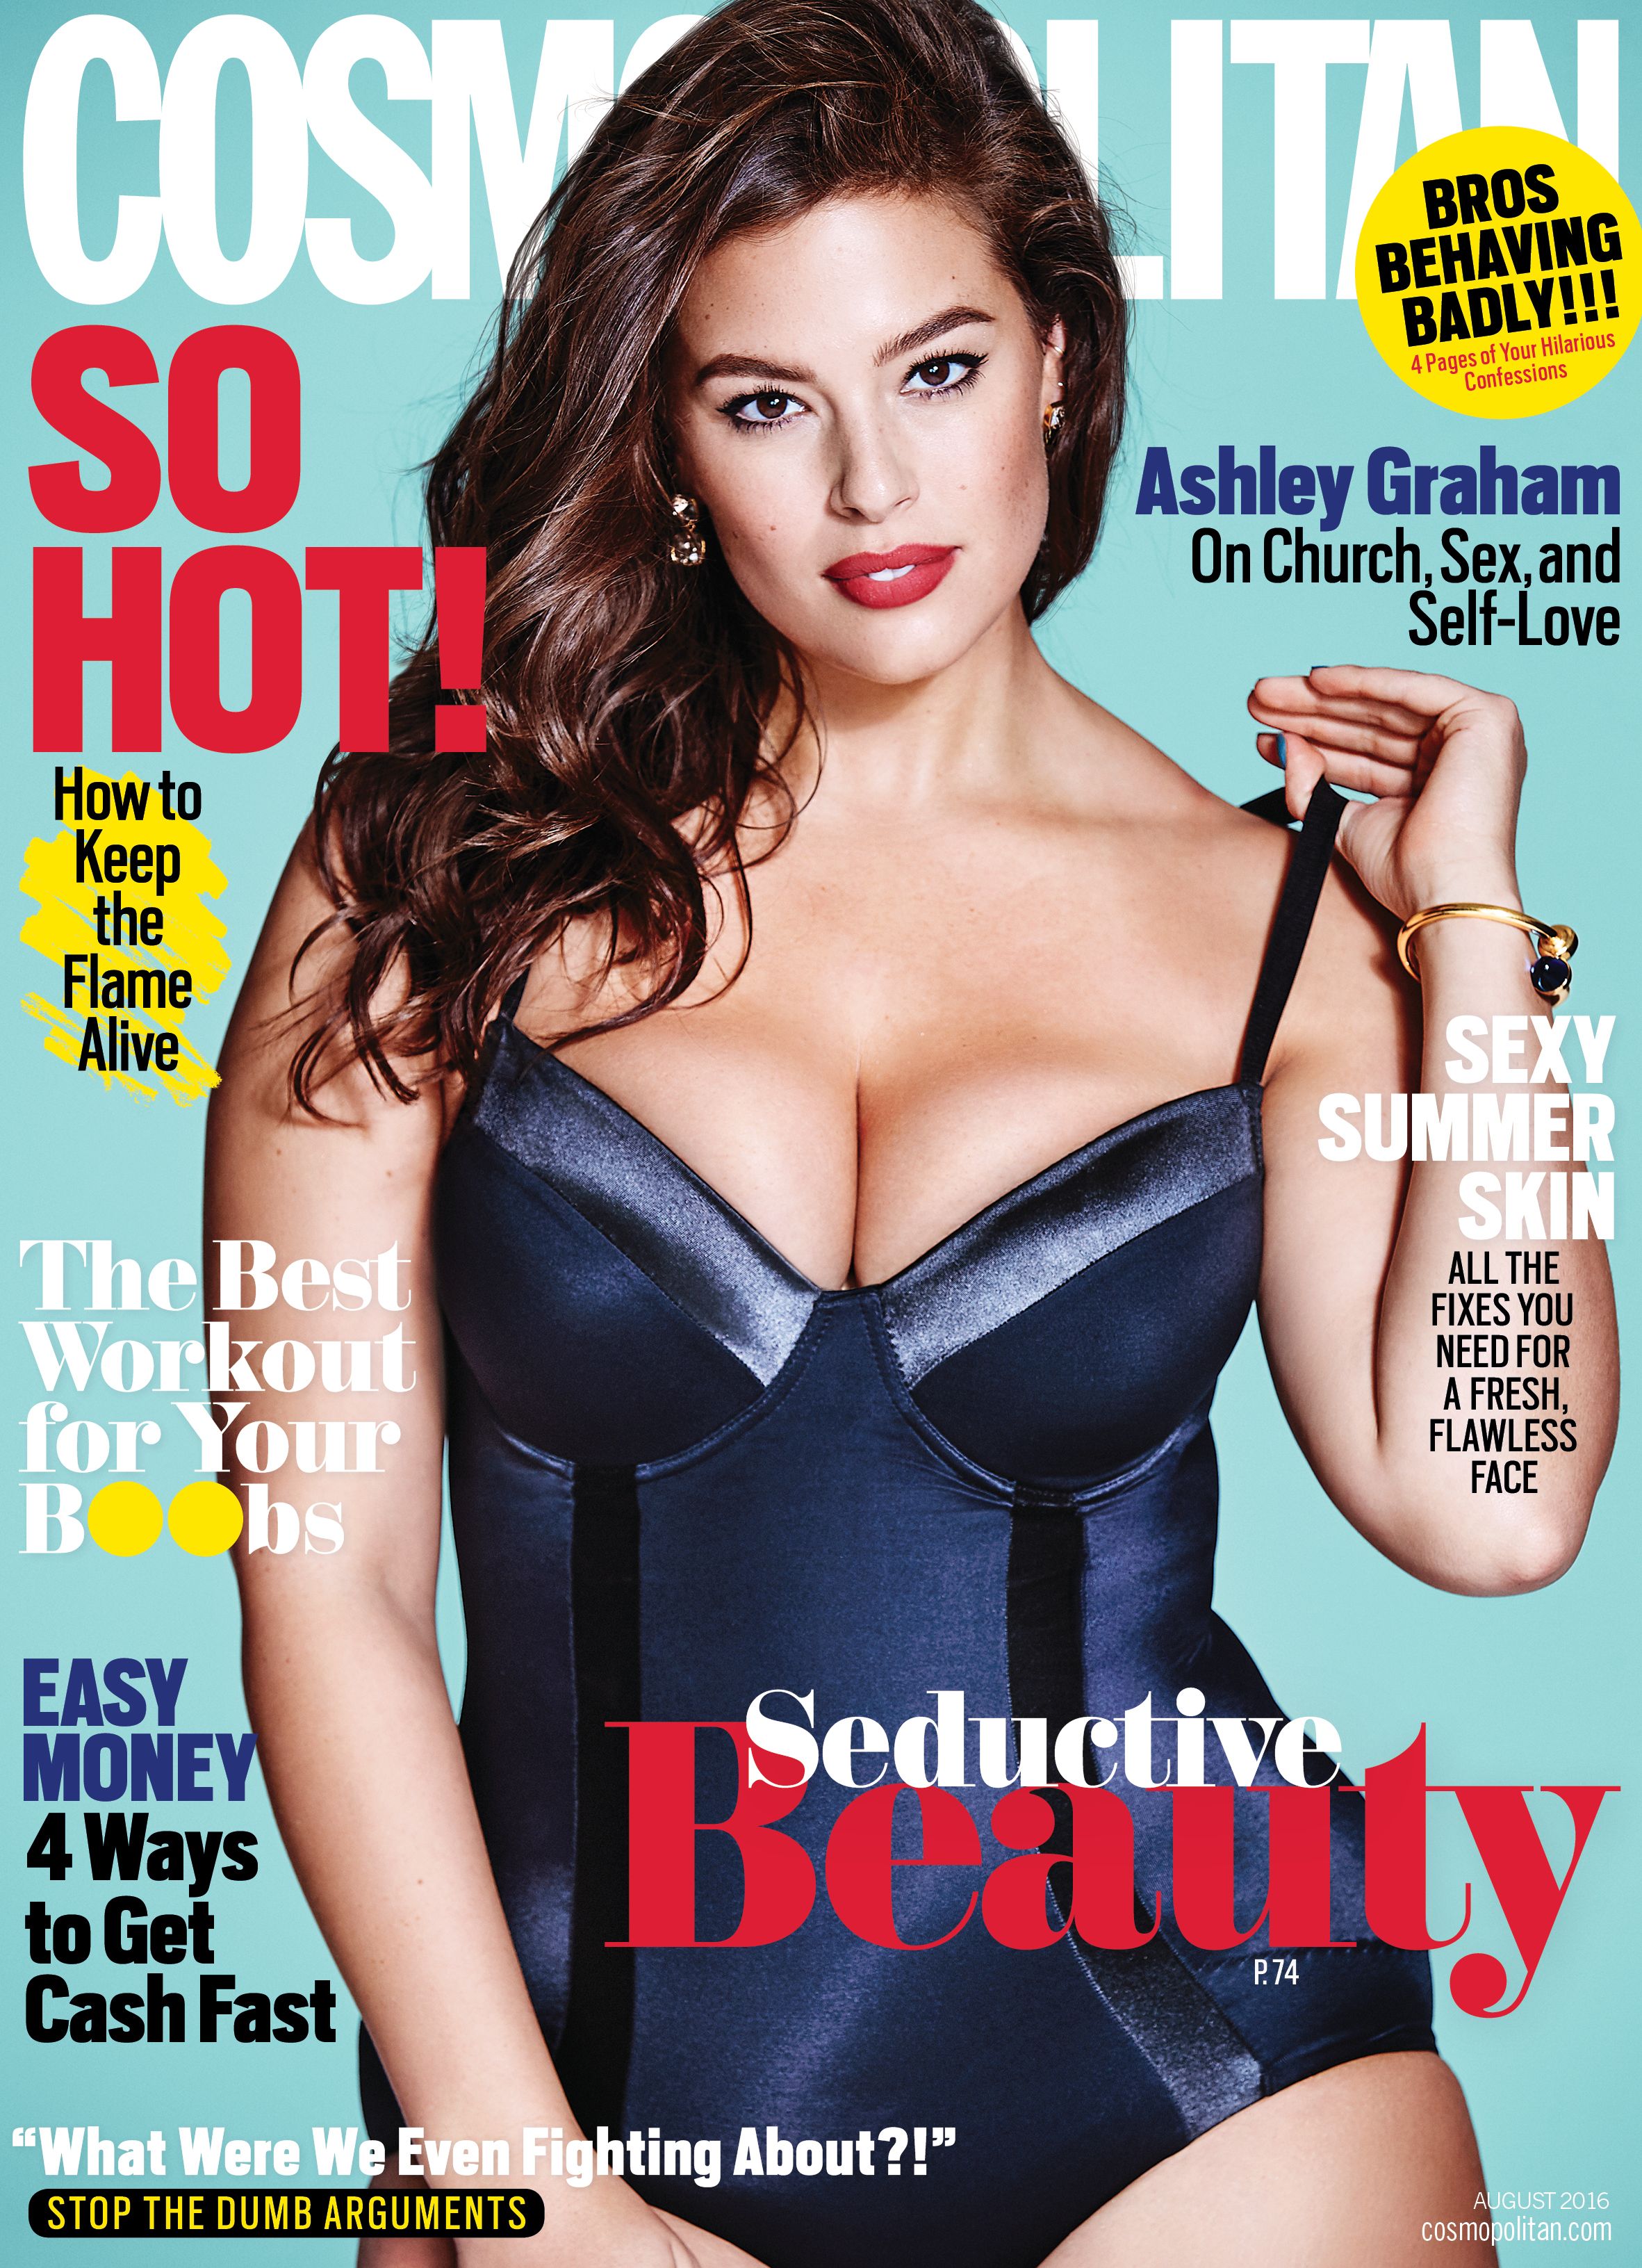 Interracial Sex Magazine Covers - Ashley Graham on August 2016 Cosmopolitan Cover - Cosmo Cover Stars